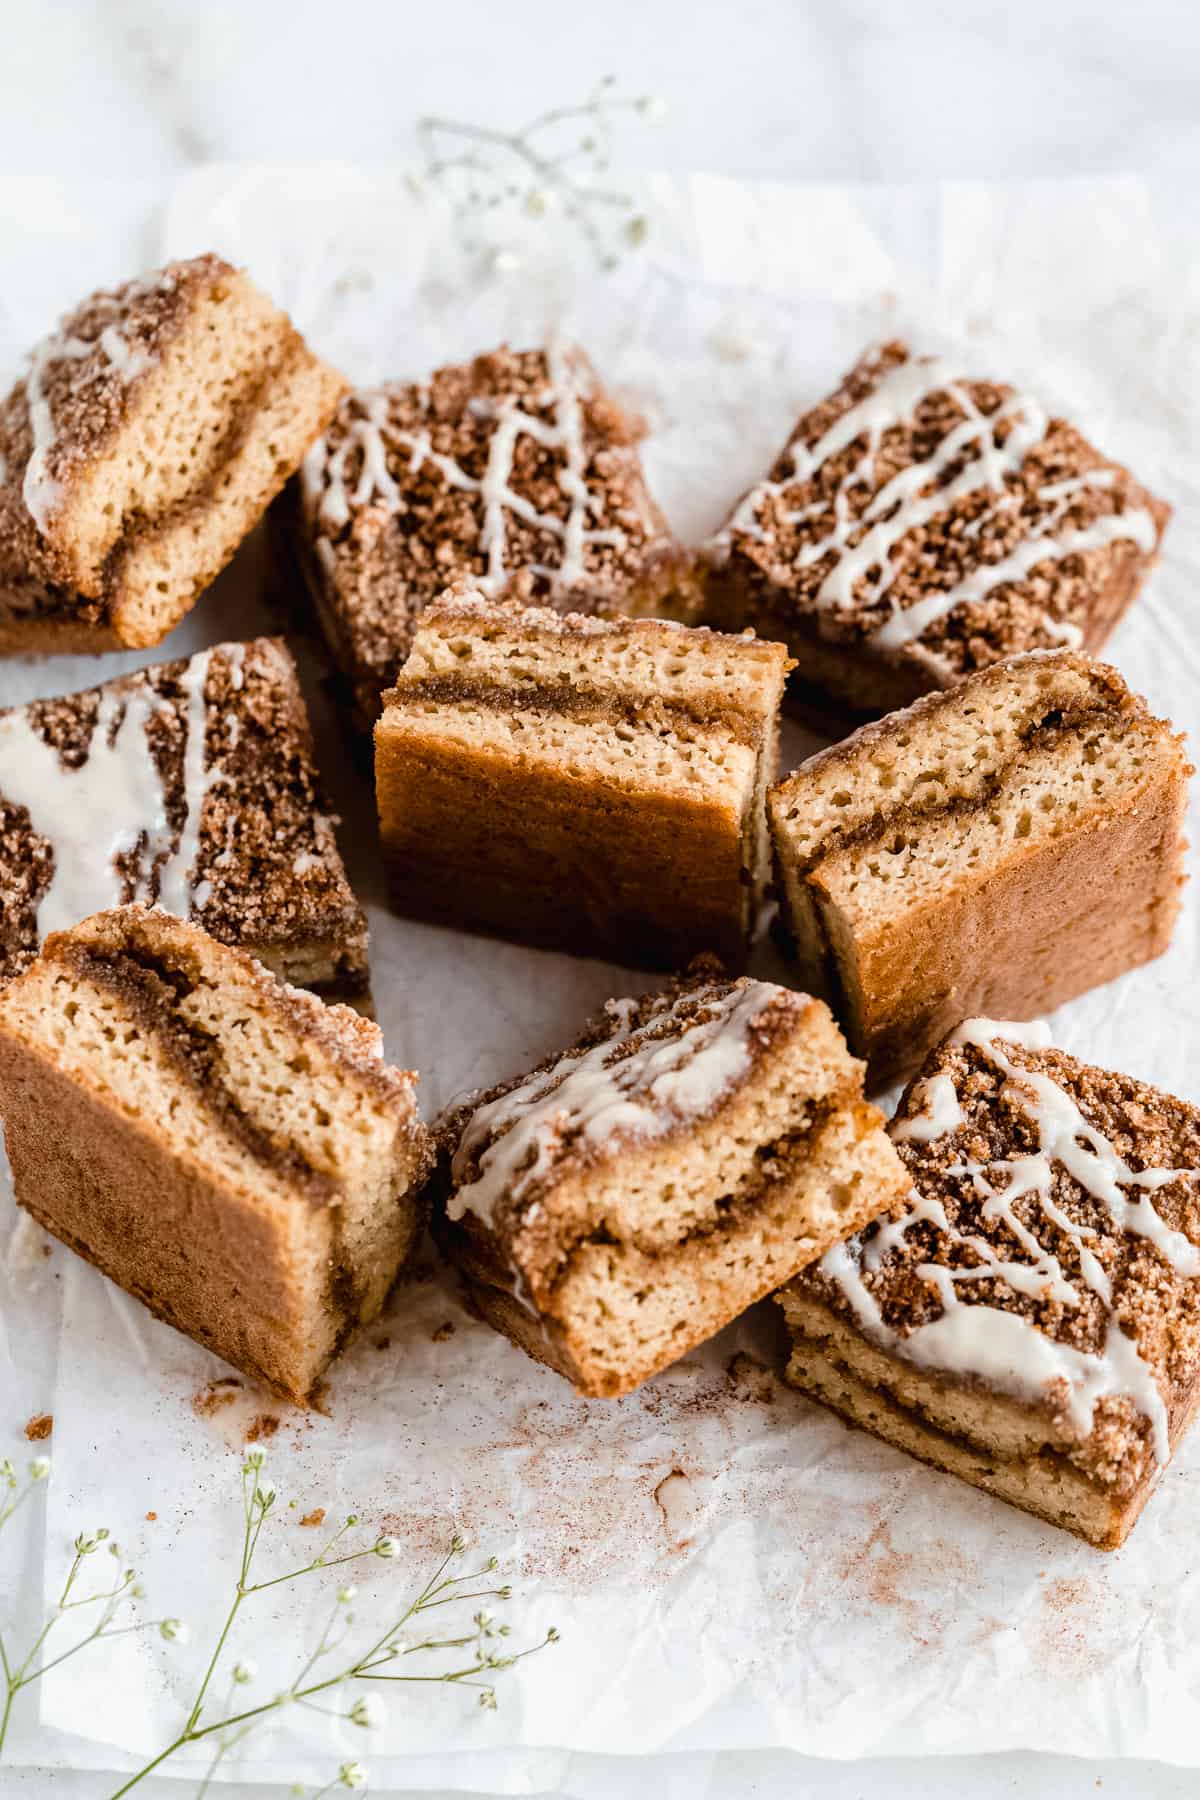 Cinnamon coffee cake cut into slices and scattered on parchment paper.